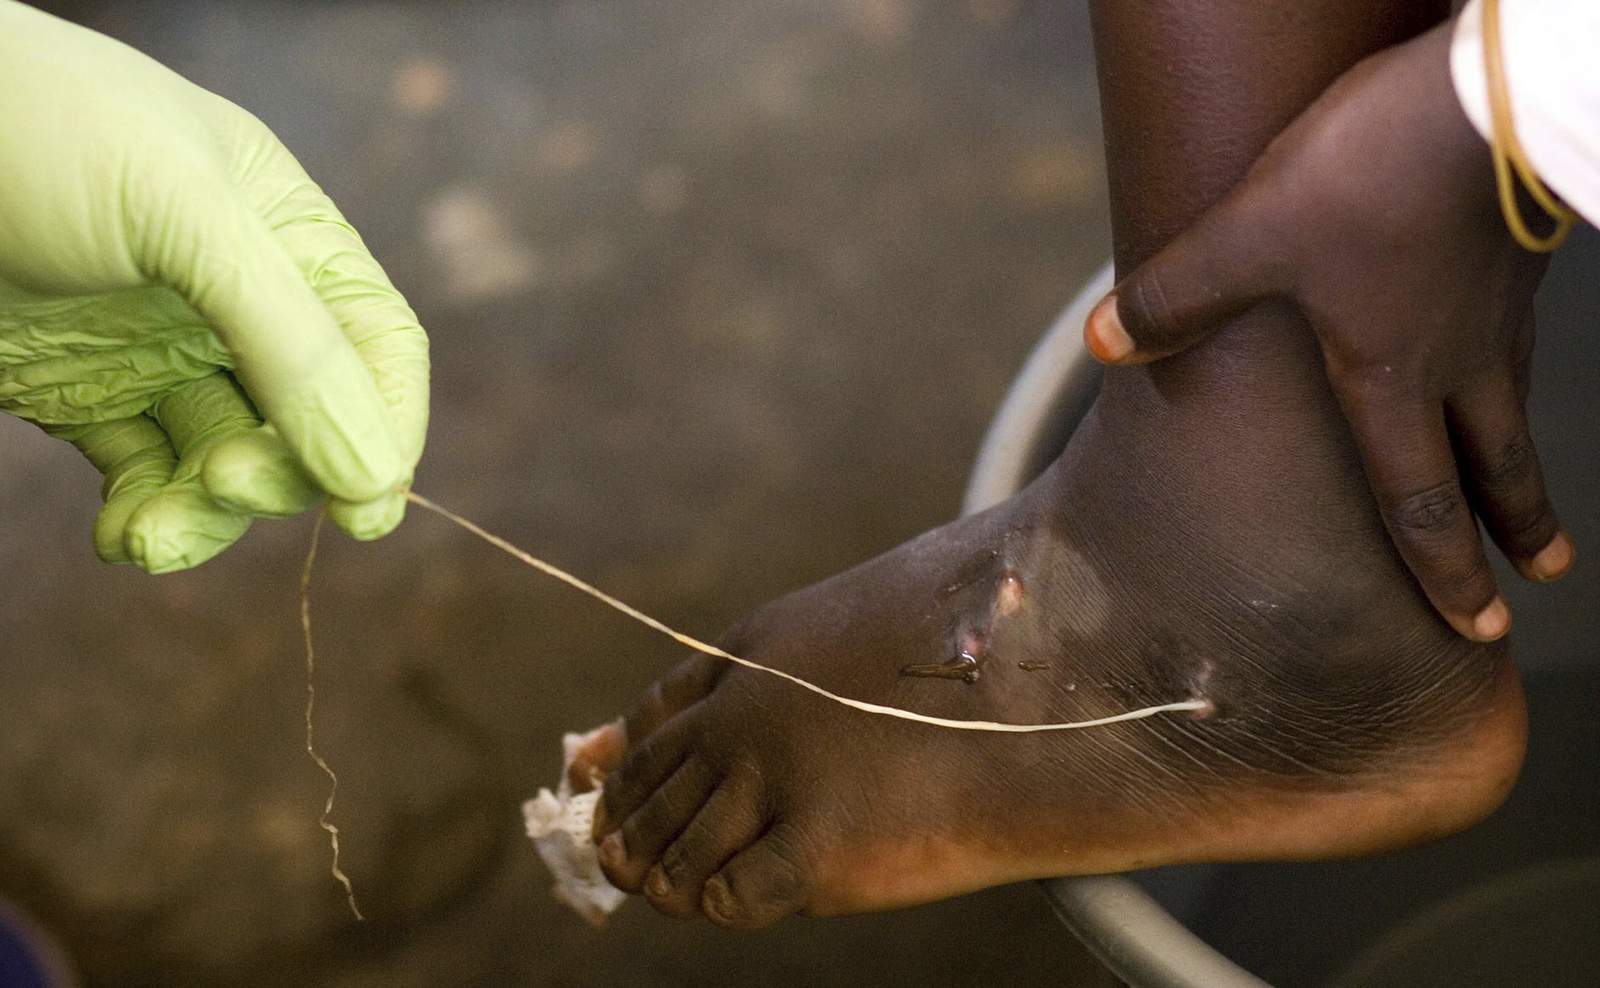 Guinea worm closer to eradication as cases halve in a year